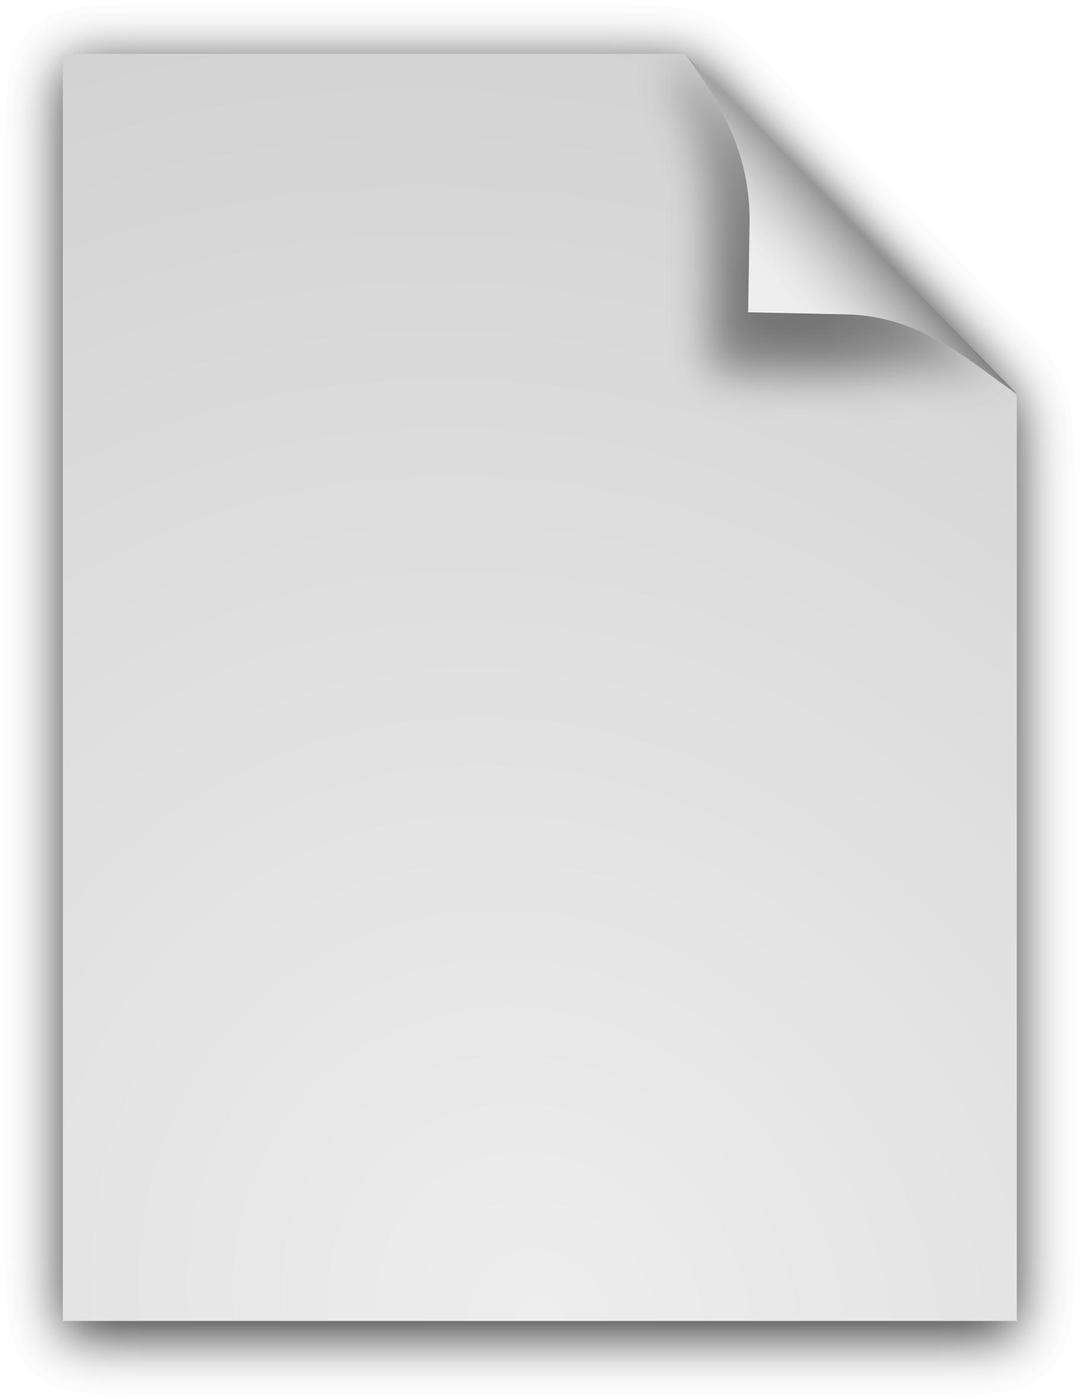 Generic File Icon png transparent